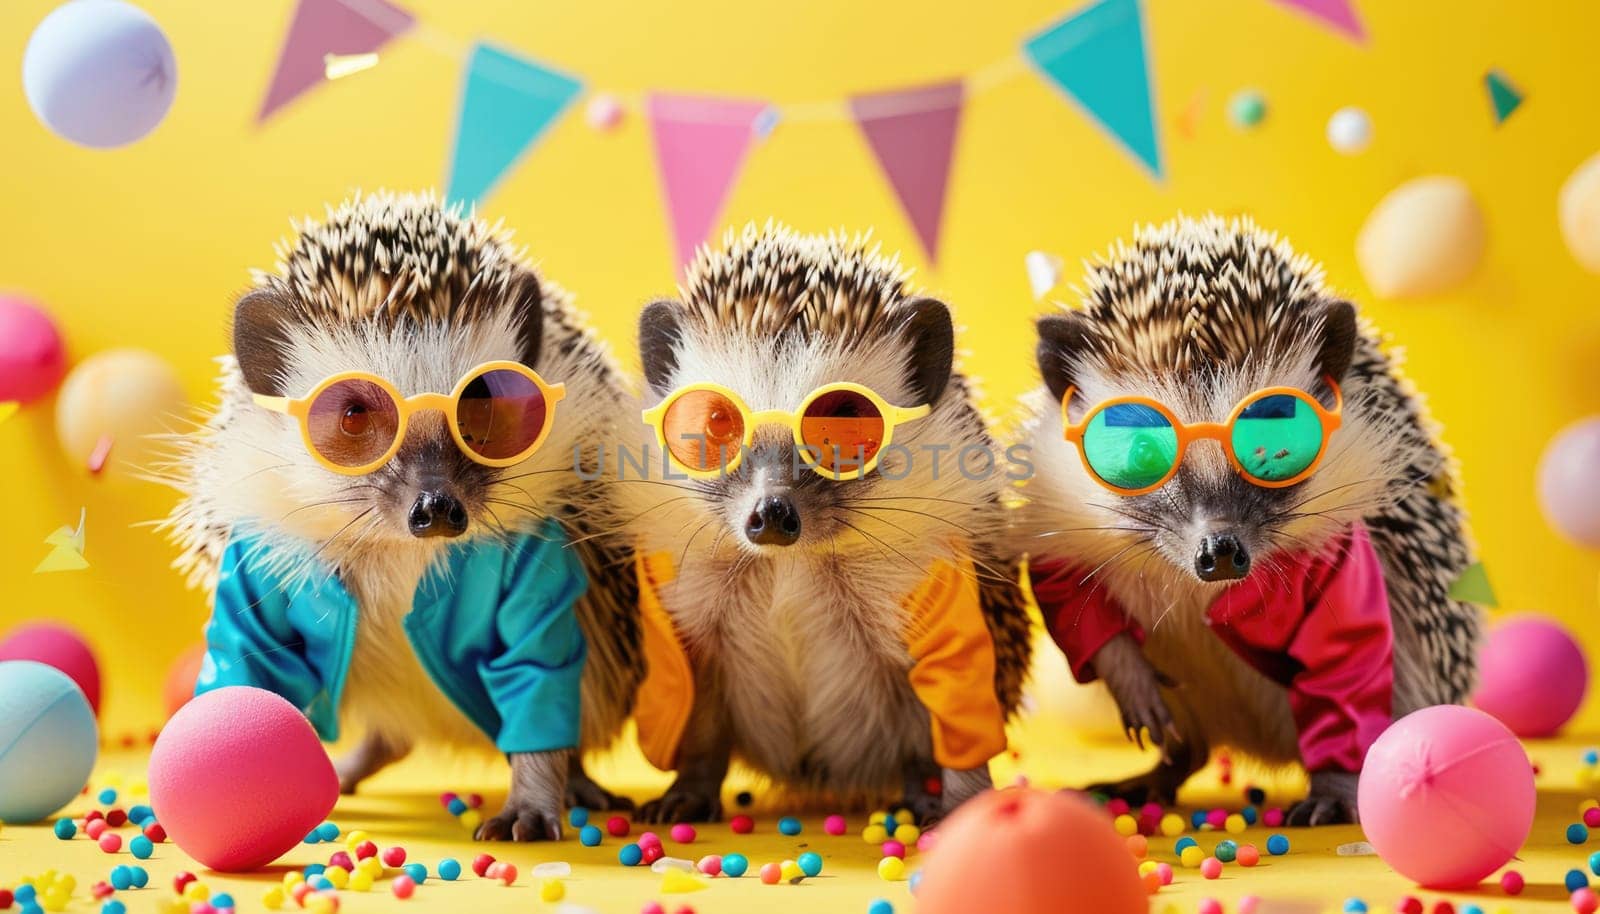 A group of hedgehogs wearing party hats by AI generated image.